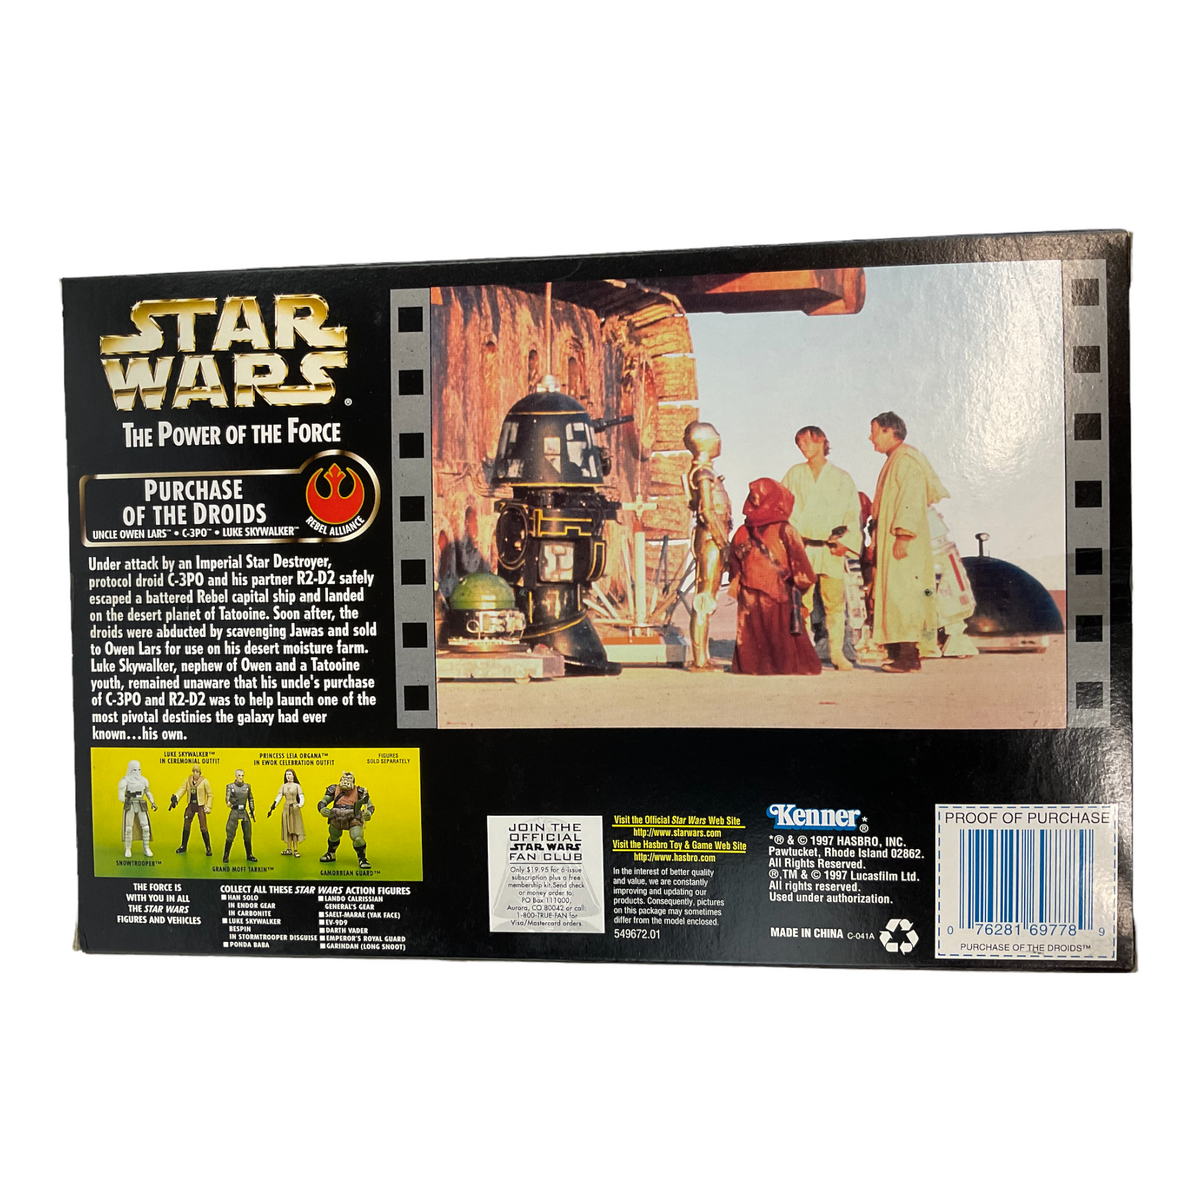 Star Wars: Power of The Force Cinema Scenes Purchase of The Droids